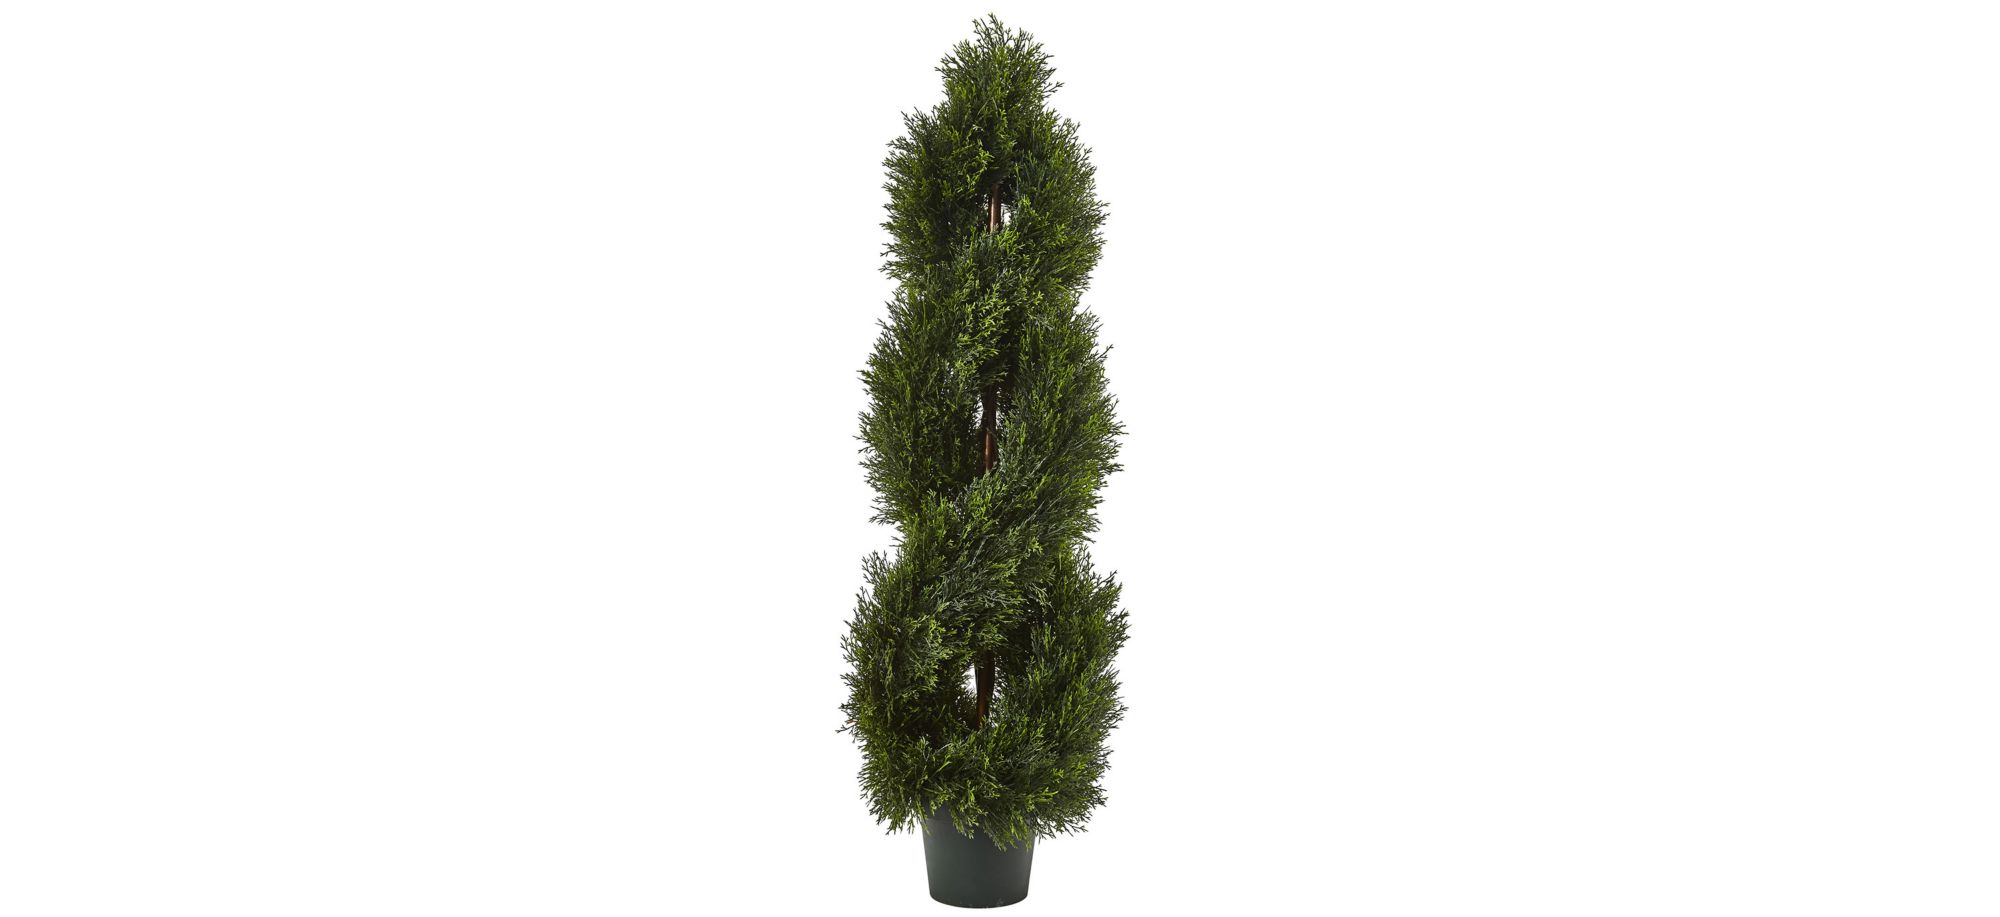 Double Pond Cypress Artificial Topiary (Indoor/Outdoor) in Green by Bellanest